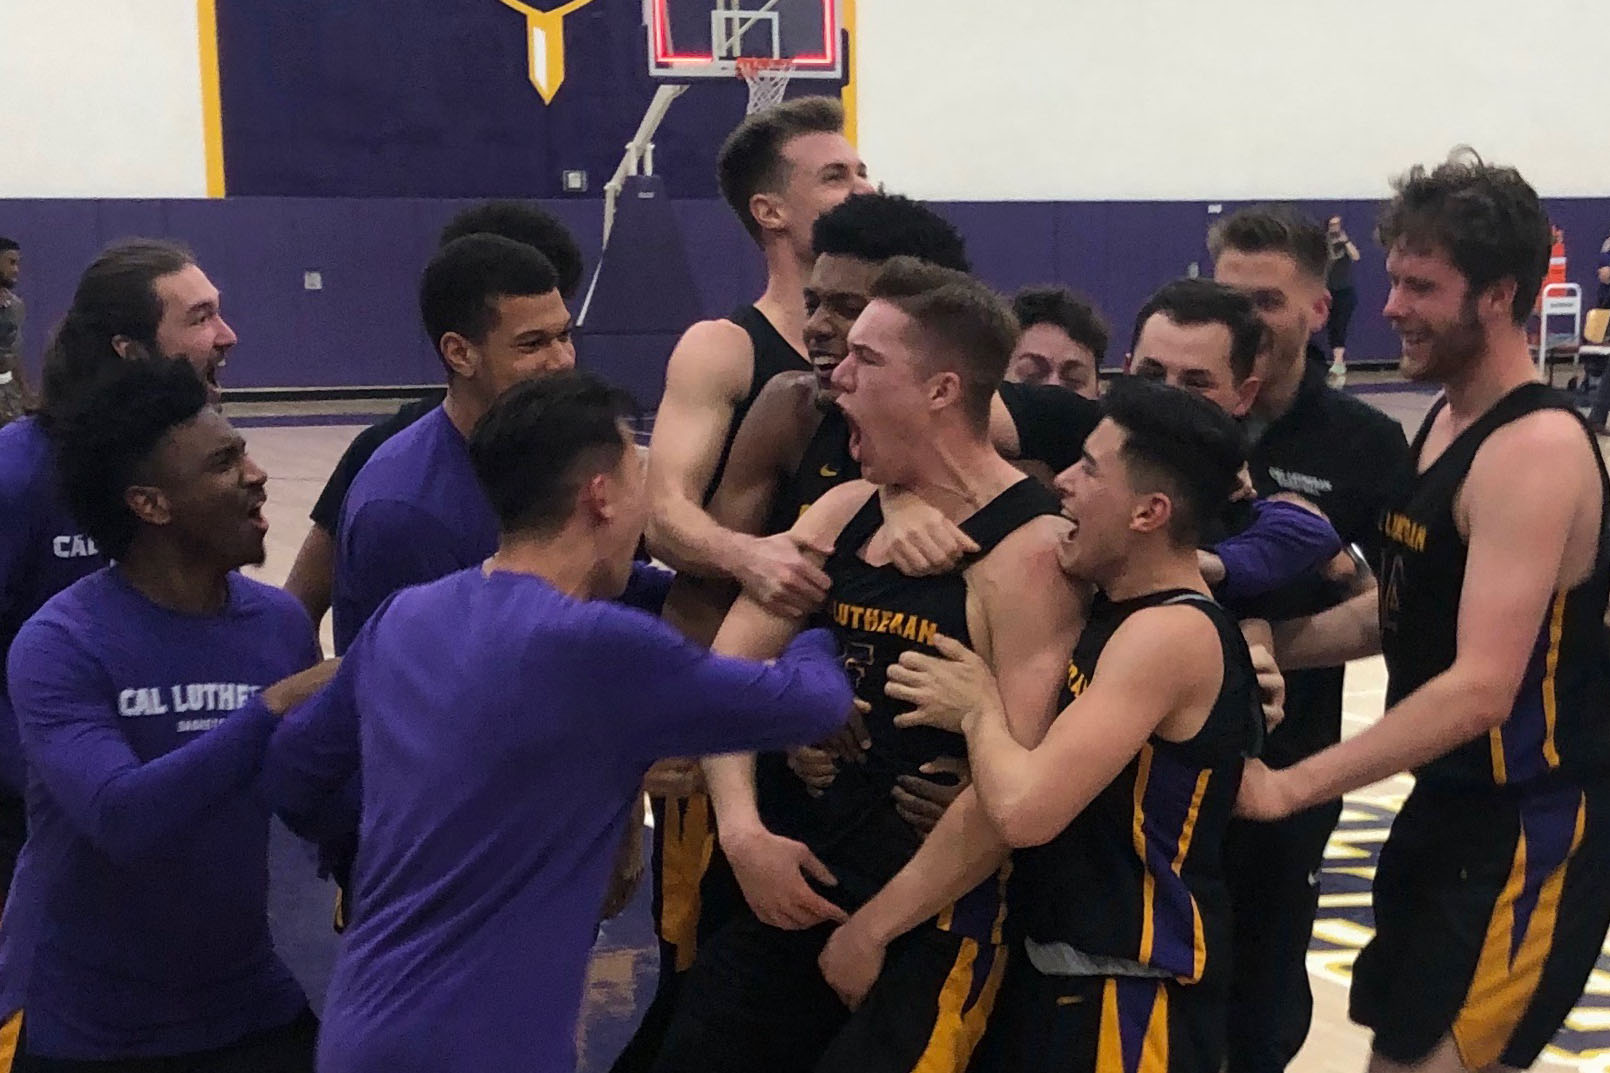 Kyle Ferreira hits a half-court buzzer beater to seal the win against Whittier.